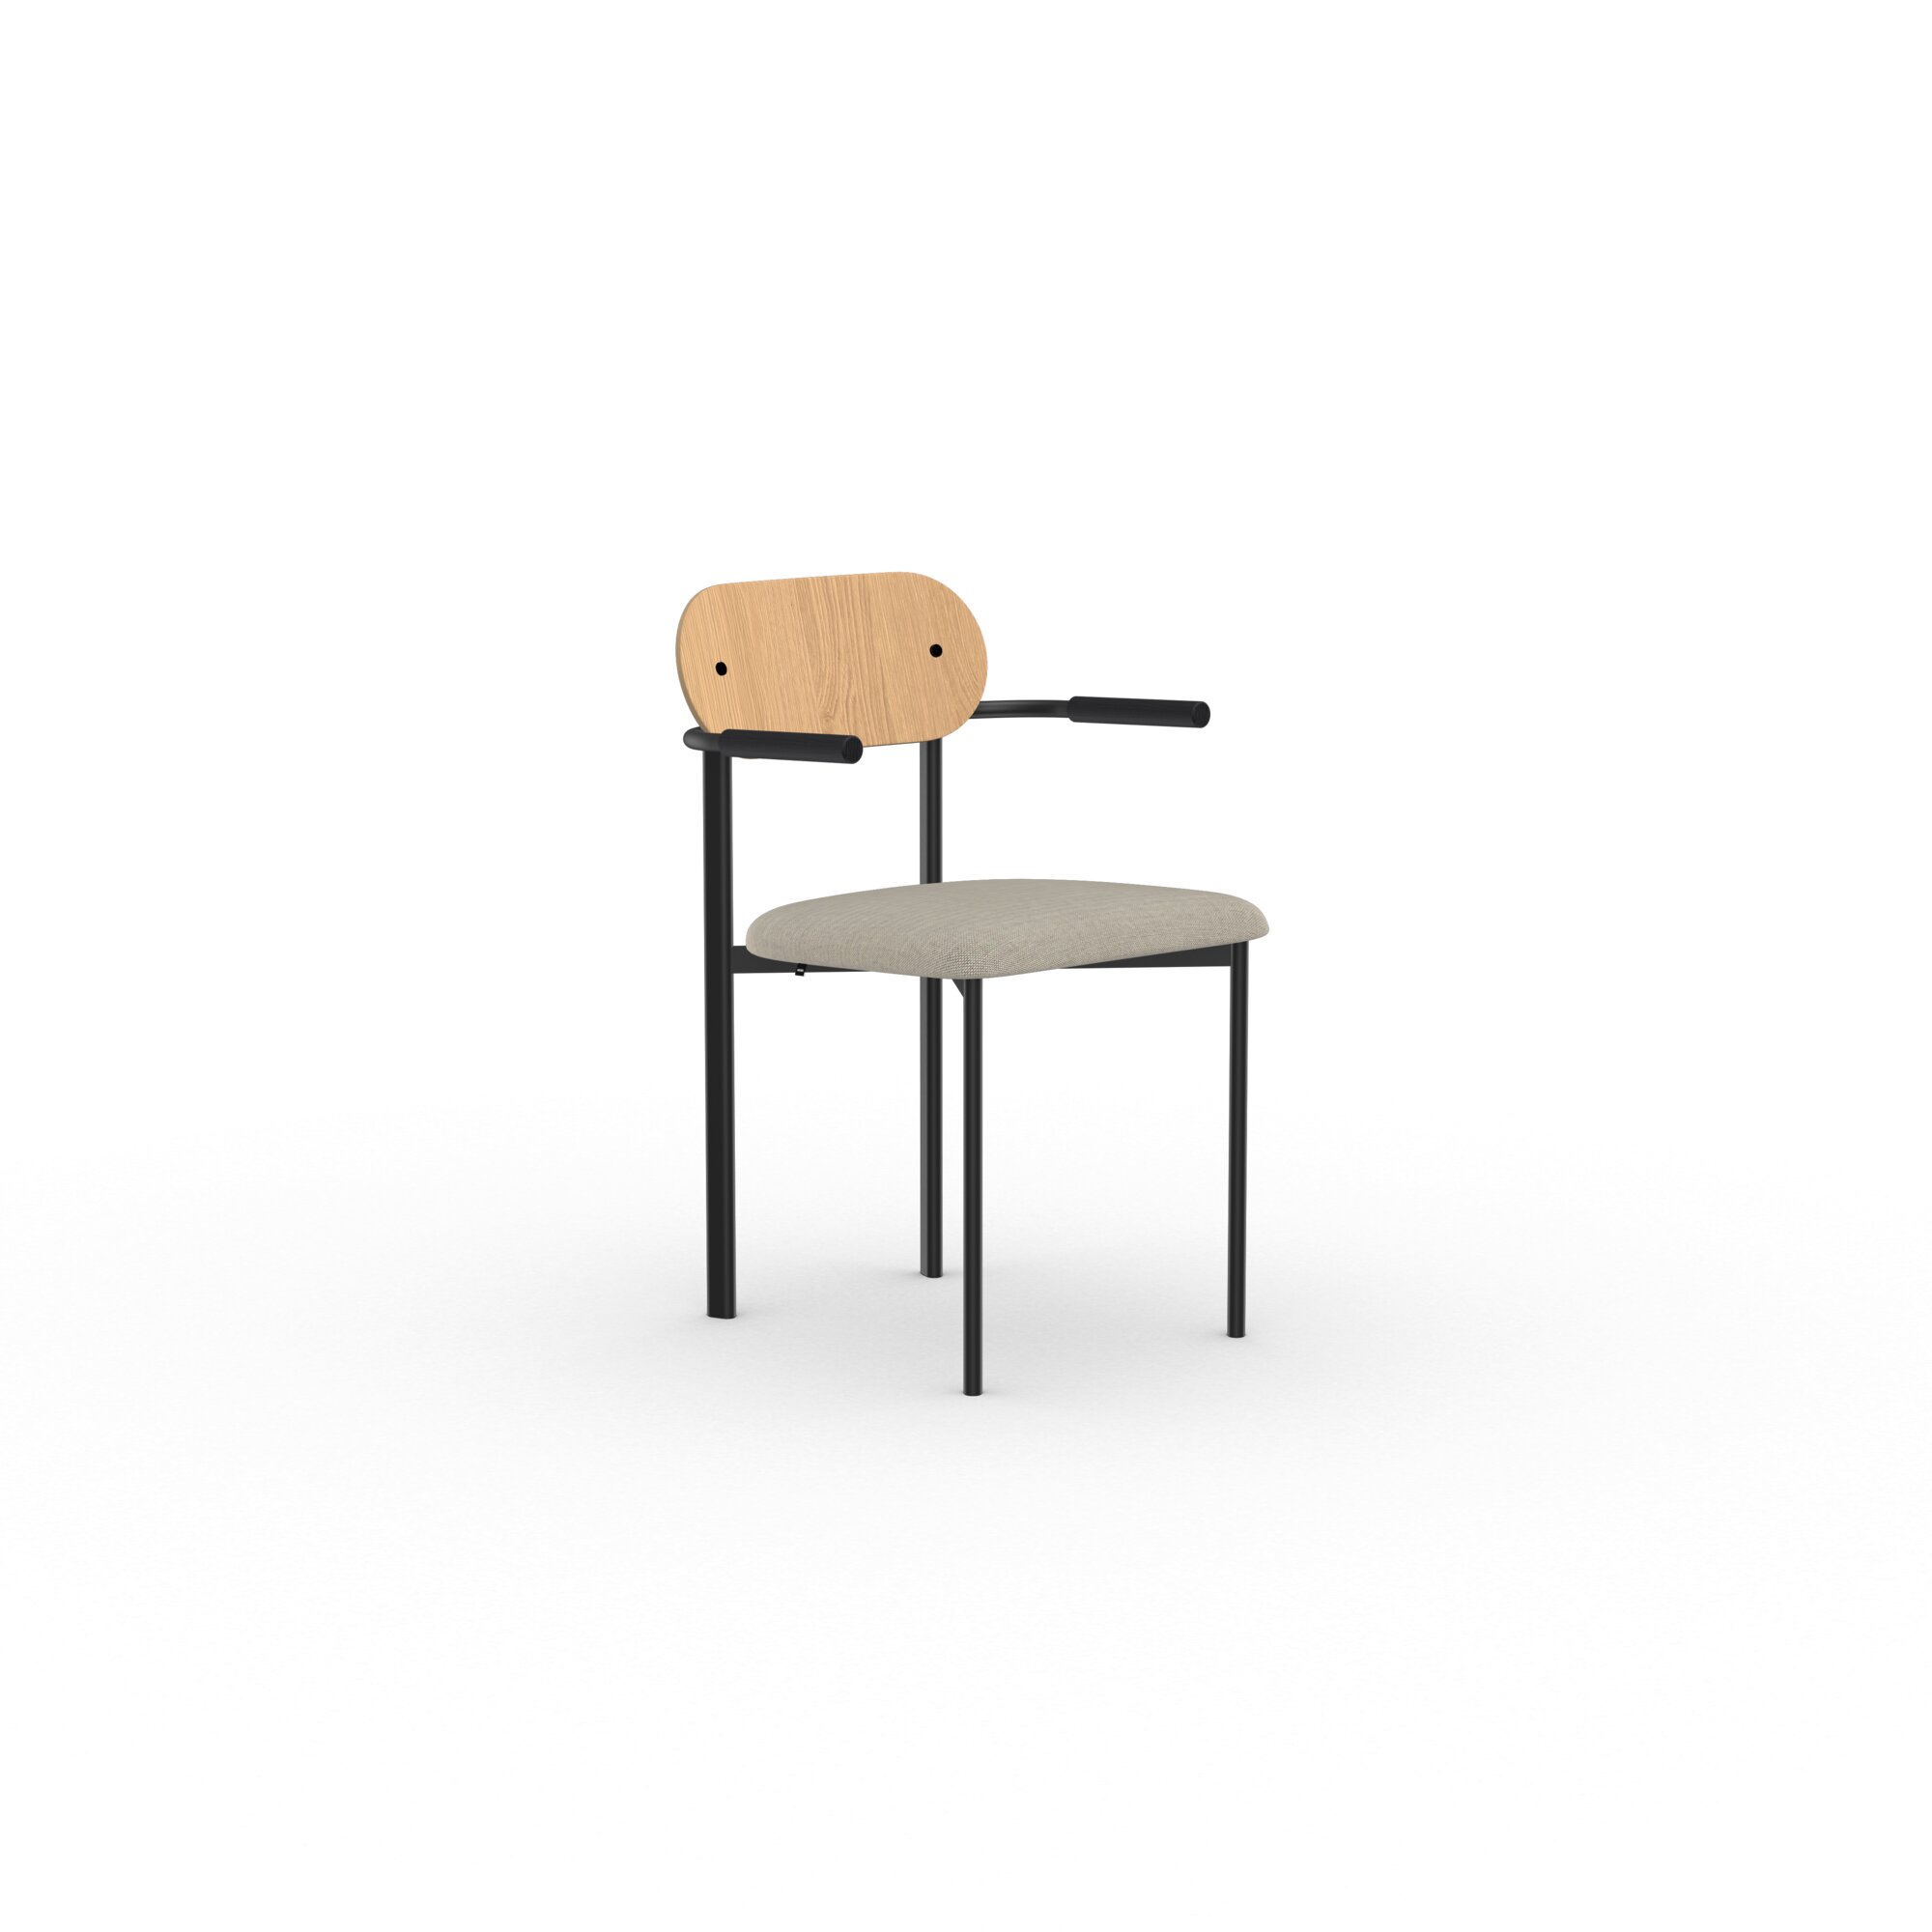 Design modern dining chair | Oblique Dining Chair with Armrest Light Brown rewool 0218 | Studio HENK| 